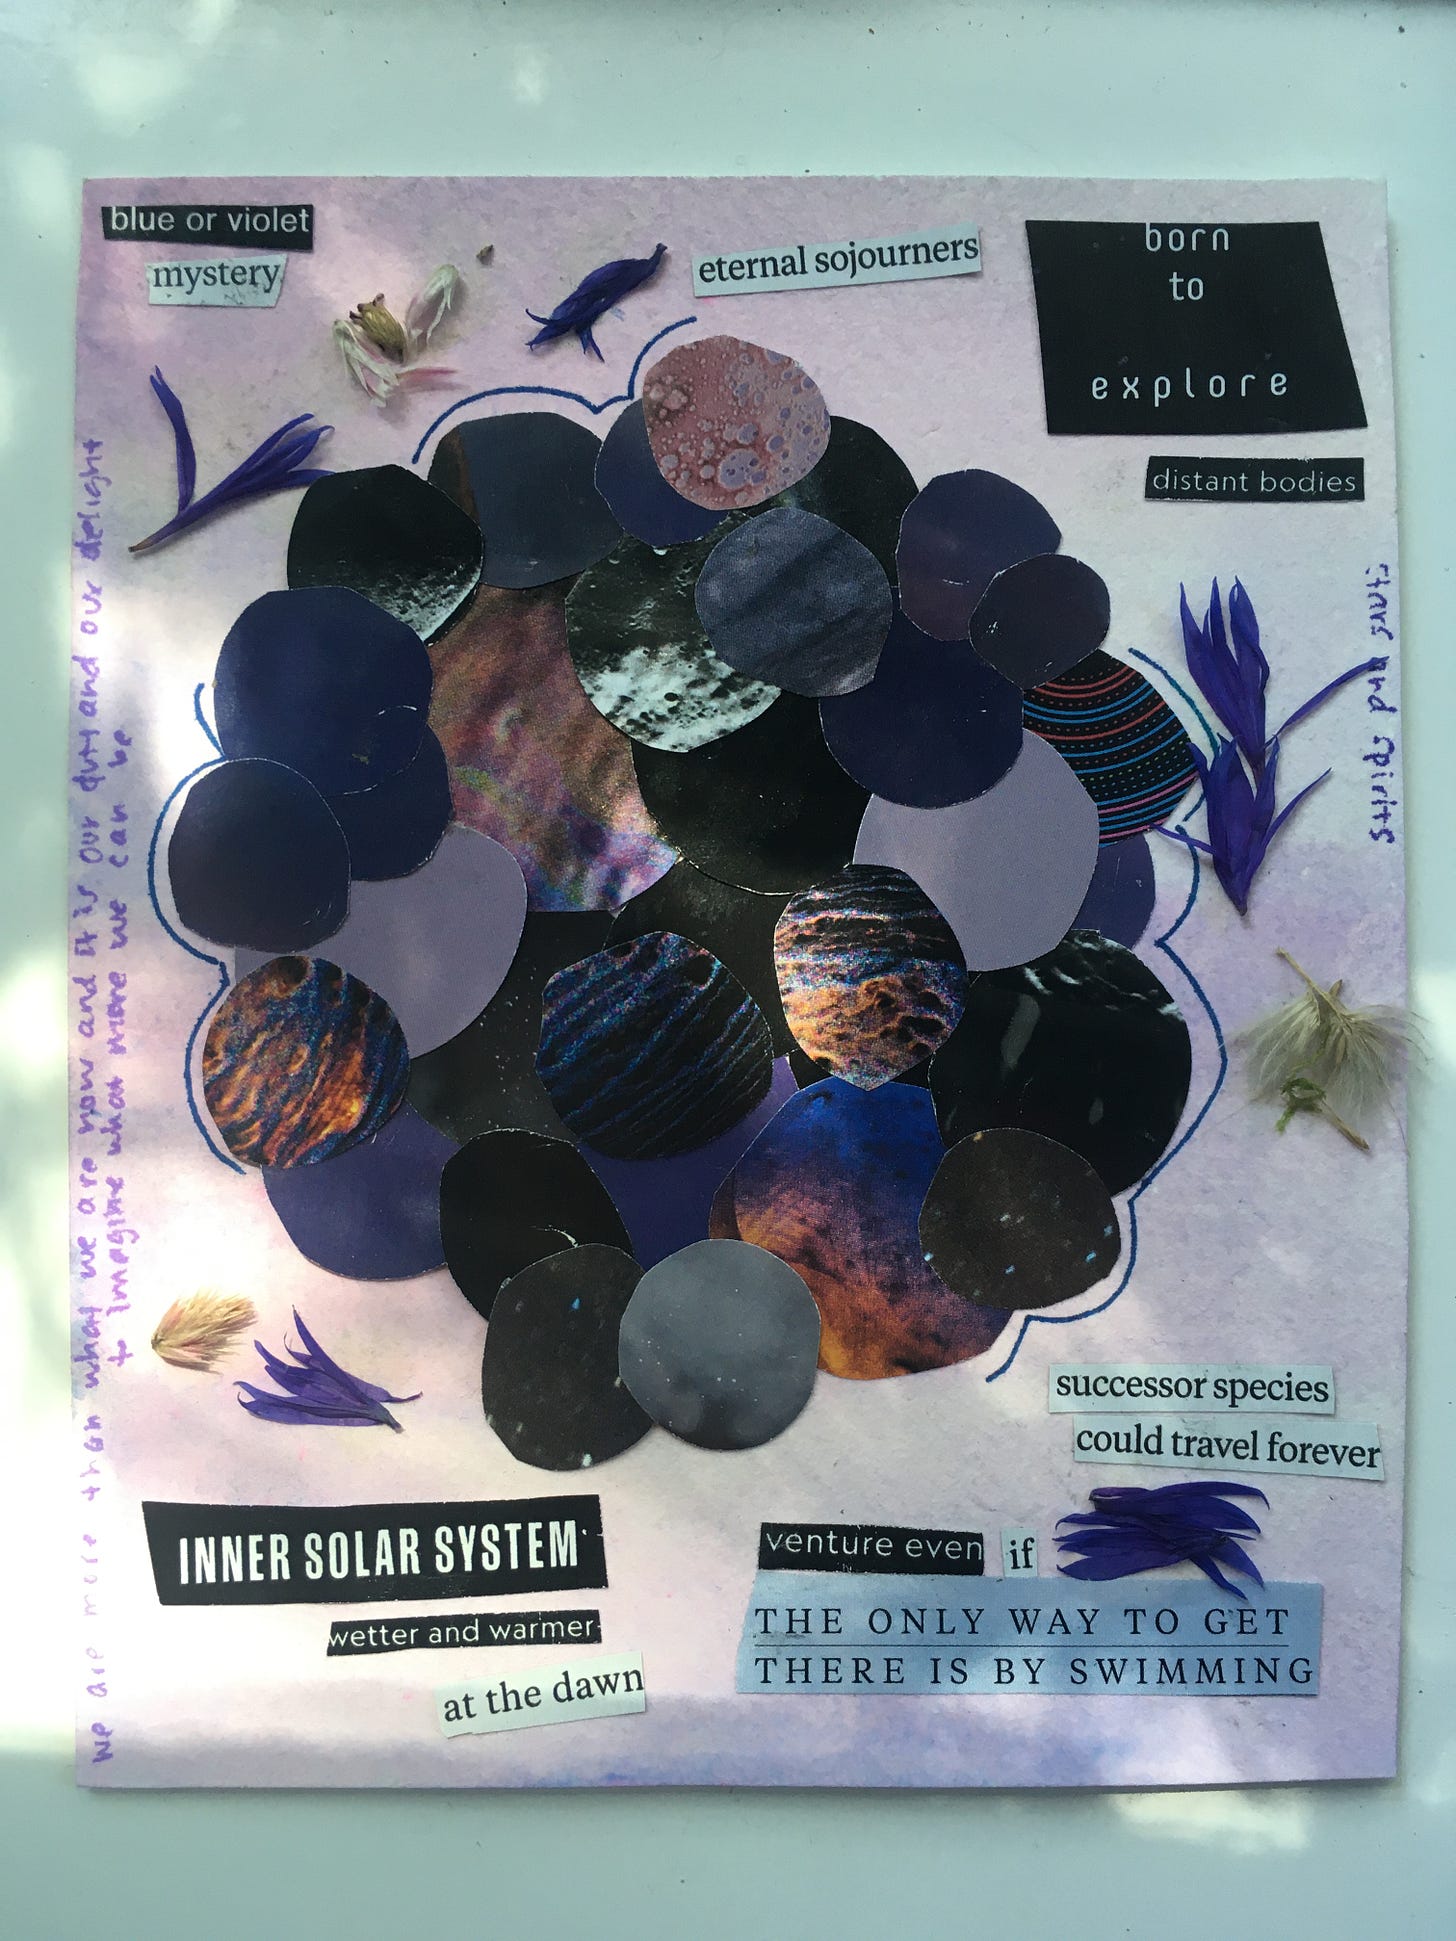 collage of "blackberry" made from space-themed cutout circles, surrounded by purple-and-white plant matter on a purple background. texts read: "blue or violet mystery," "eternal sojourners born to explore distant bodies," "inner solar system wetter and warmer at the dawn," "successor species could travel forever," "venture even if the only way to get there is by swimming"